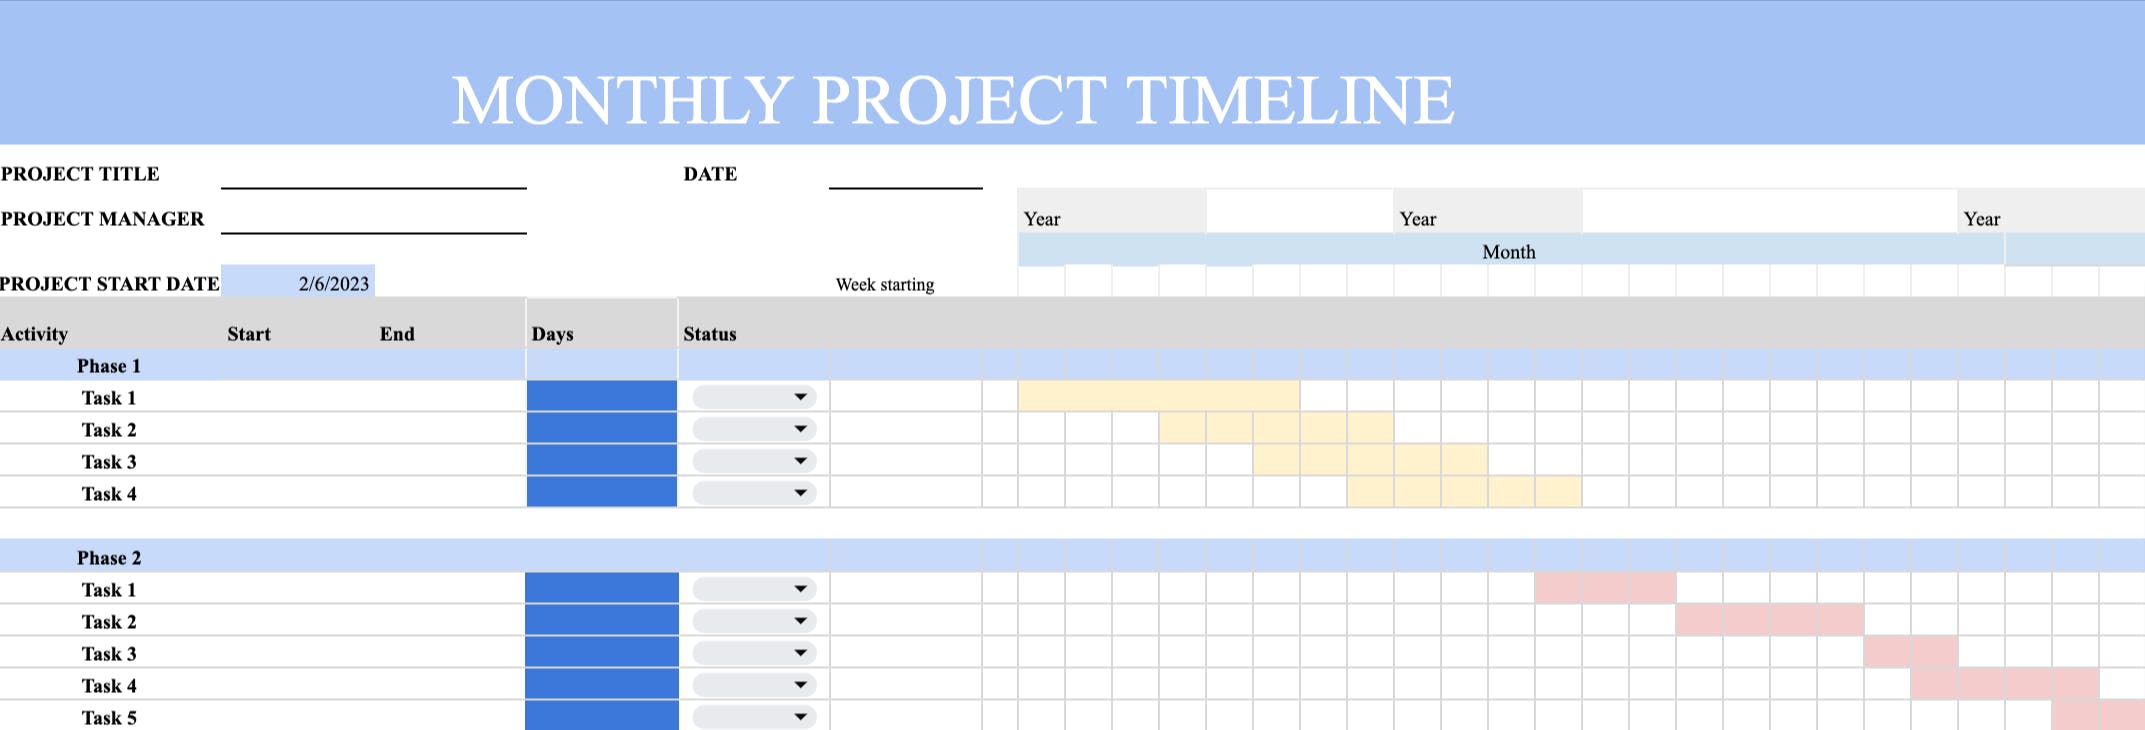 Monthly project timeline template